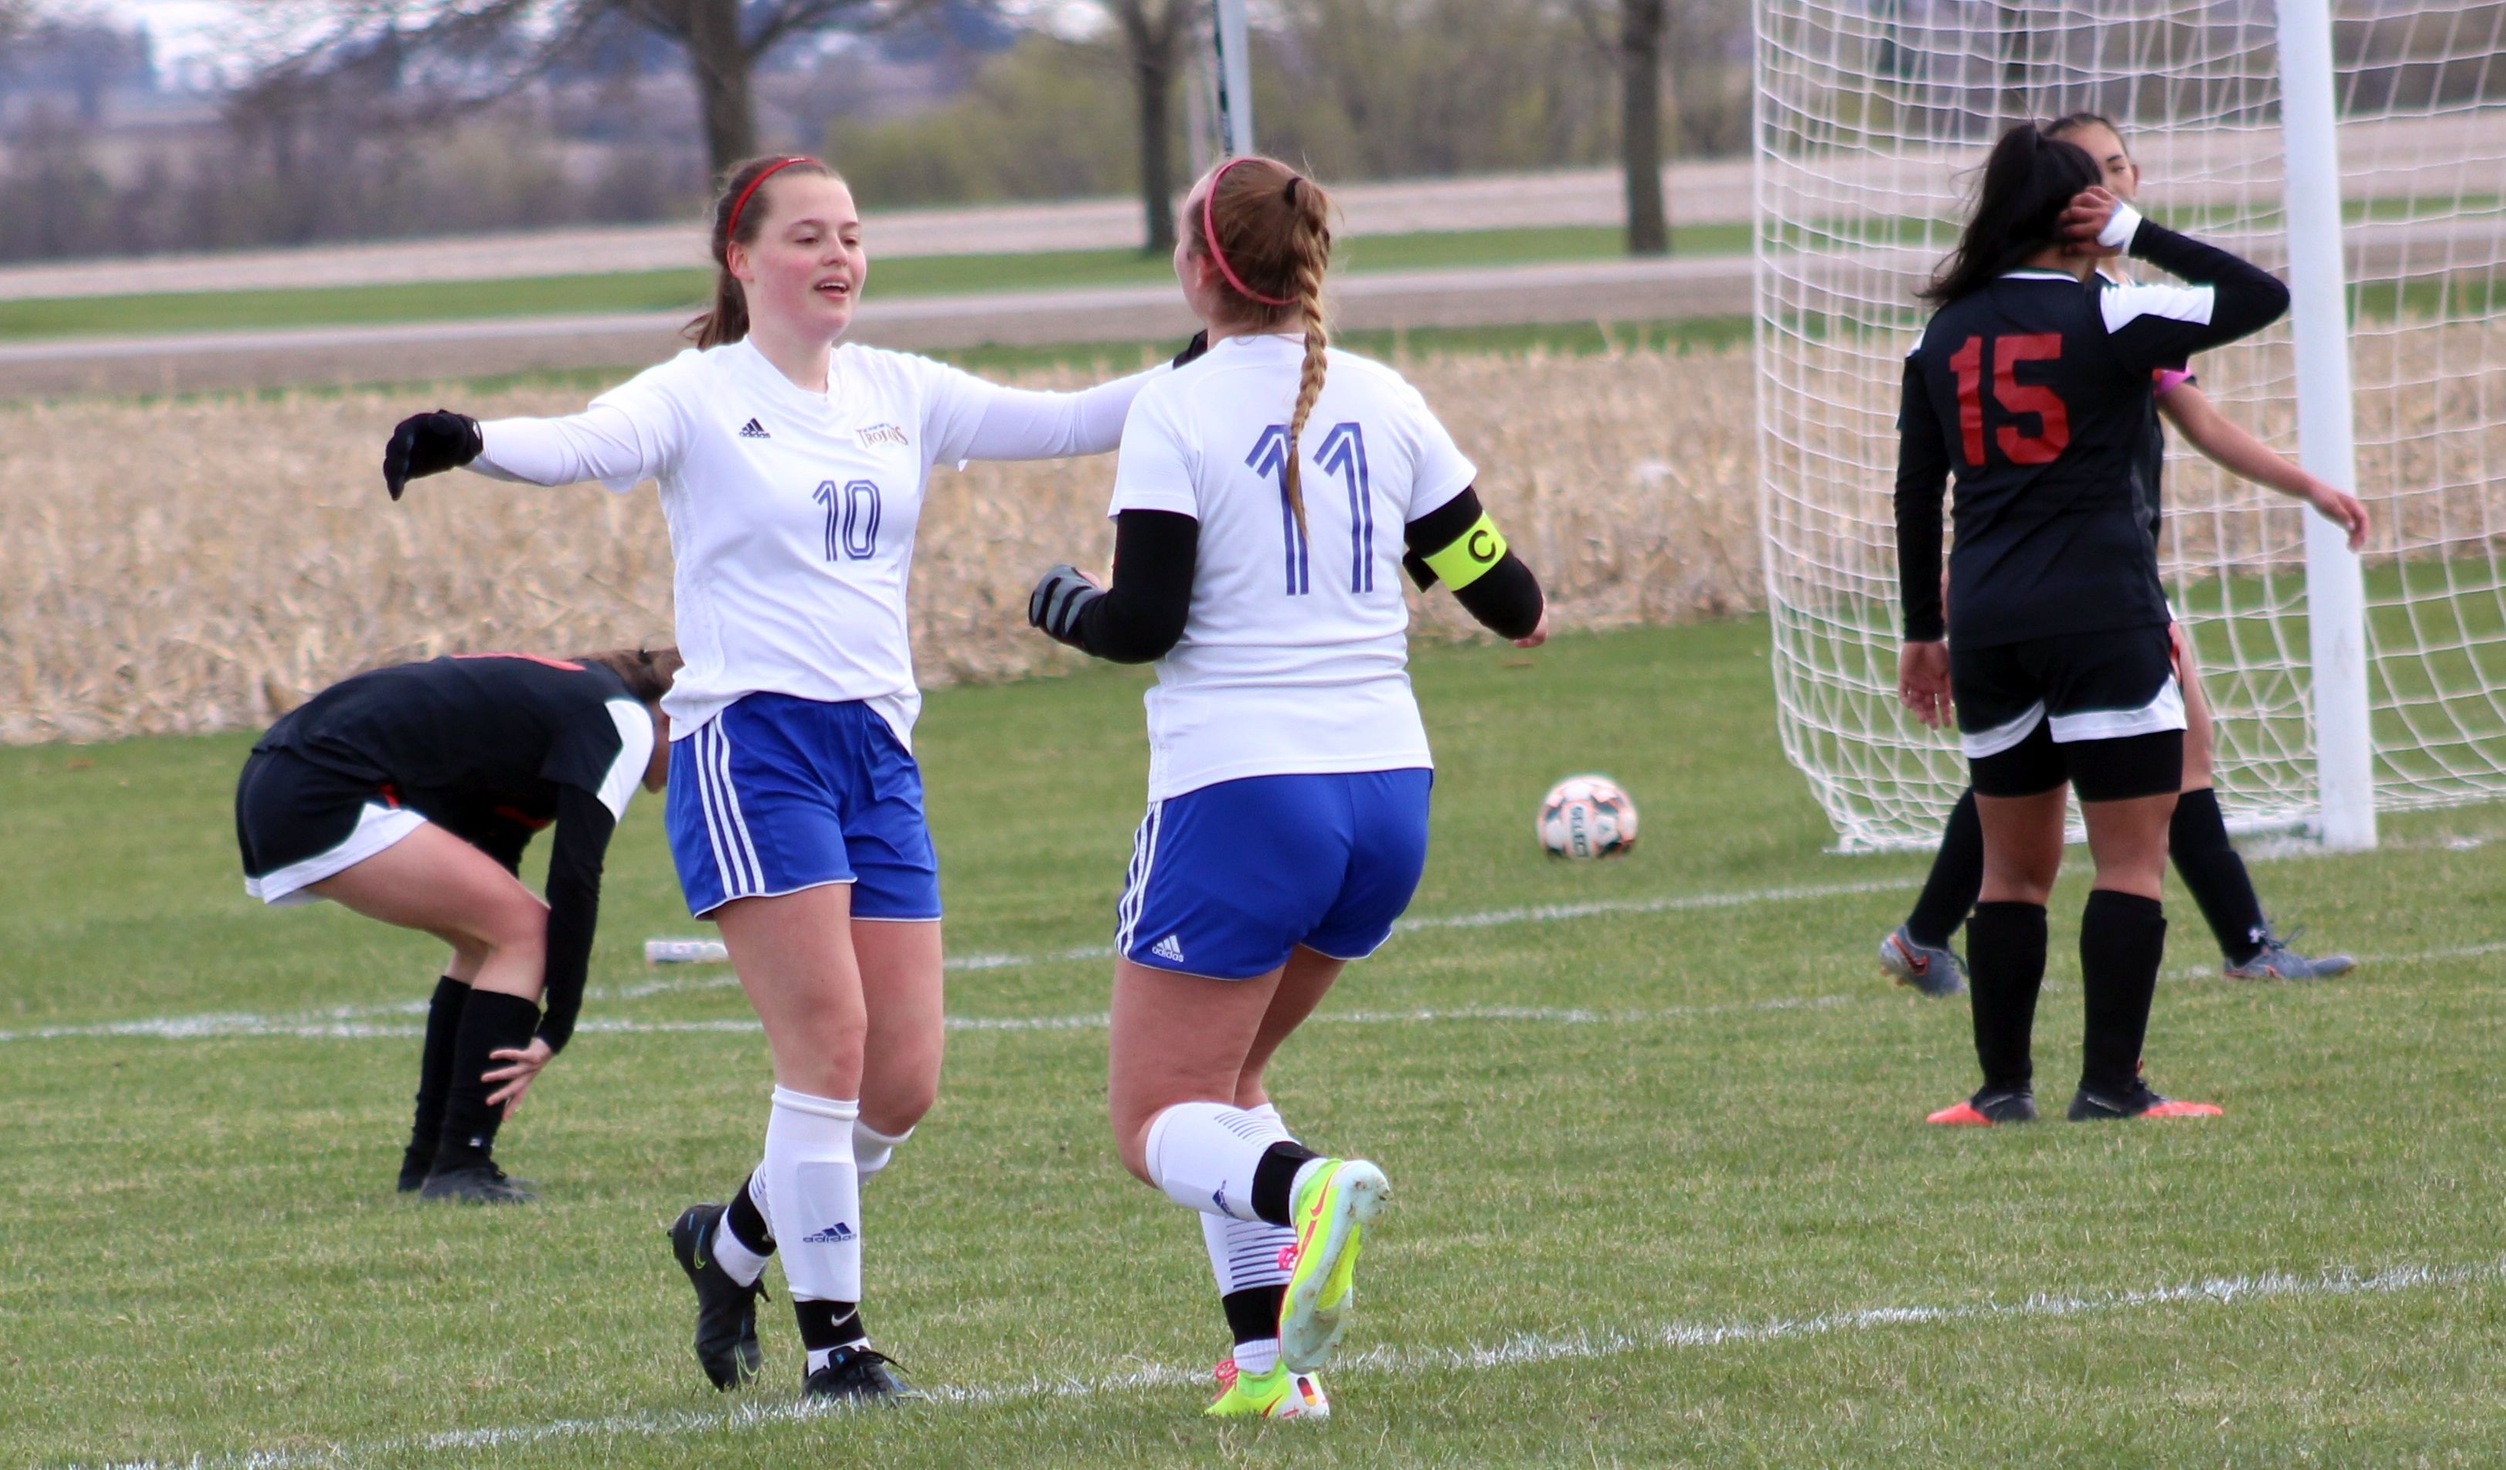 NIACC's Sophia Gebl (11) celebrates with Celine Witt after Witt's goal gave NIACC a 2-0 lead in first half of Monday's match against Southeastern.